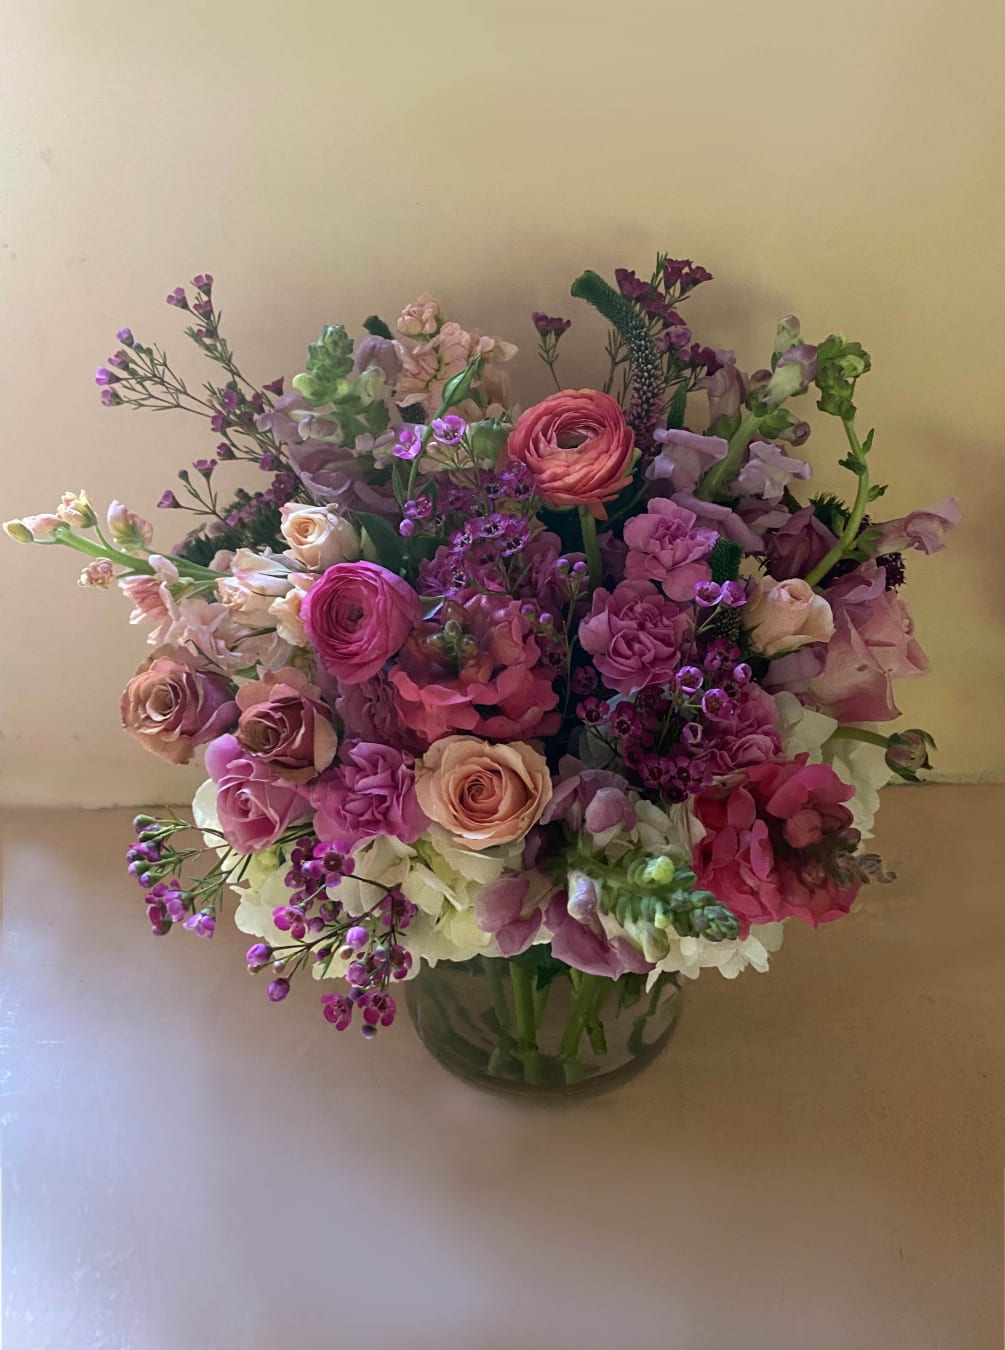 Gorgeous pink, purple and lavender palettte in this large and vibrant floral